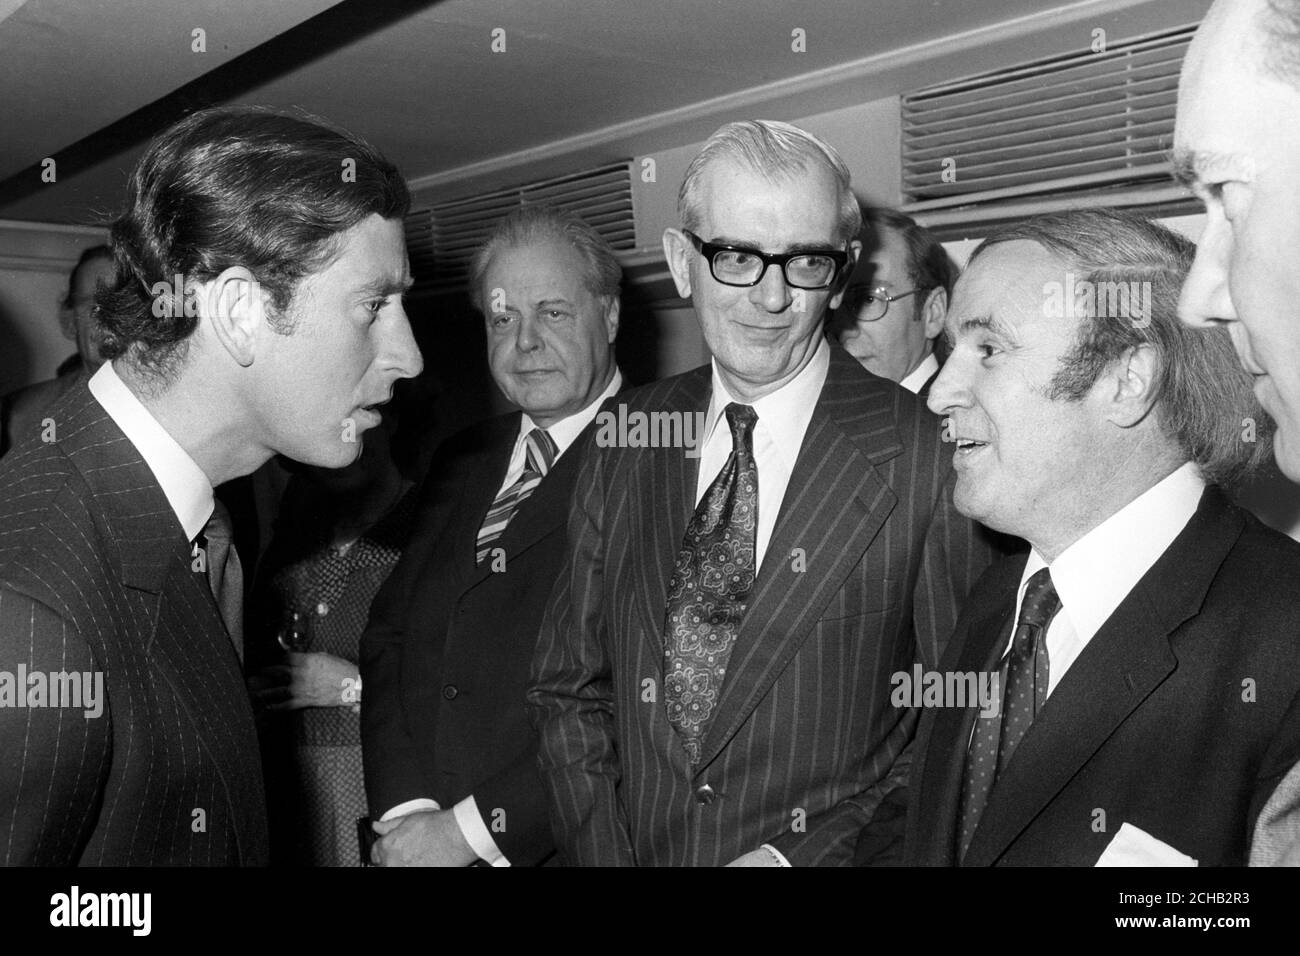 Prince Charles, who was presenting the British Press Awards, chats to one of the judges, David Chipp (r), Editor-in-Chief of the Press Association, before the presentation ceremony at the Savoy Hotel in London. Stock Photo